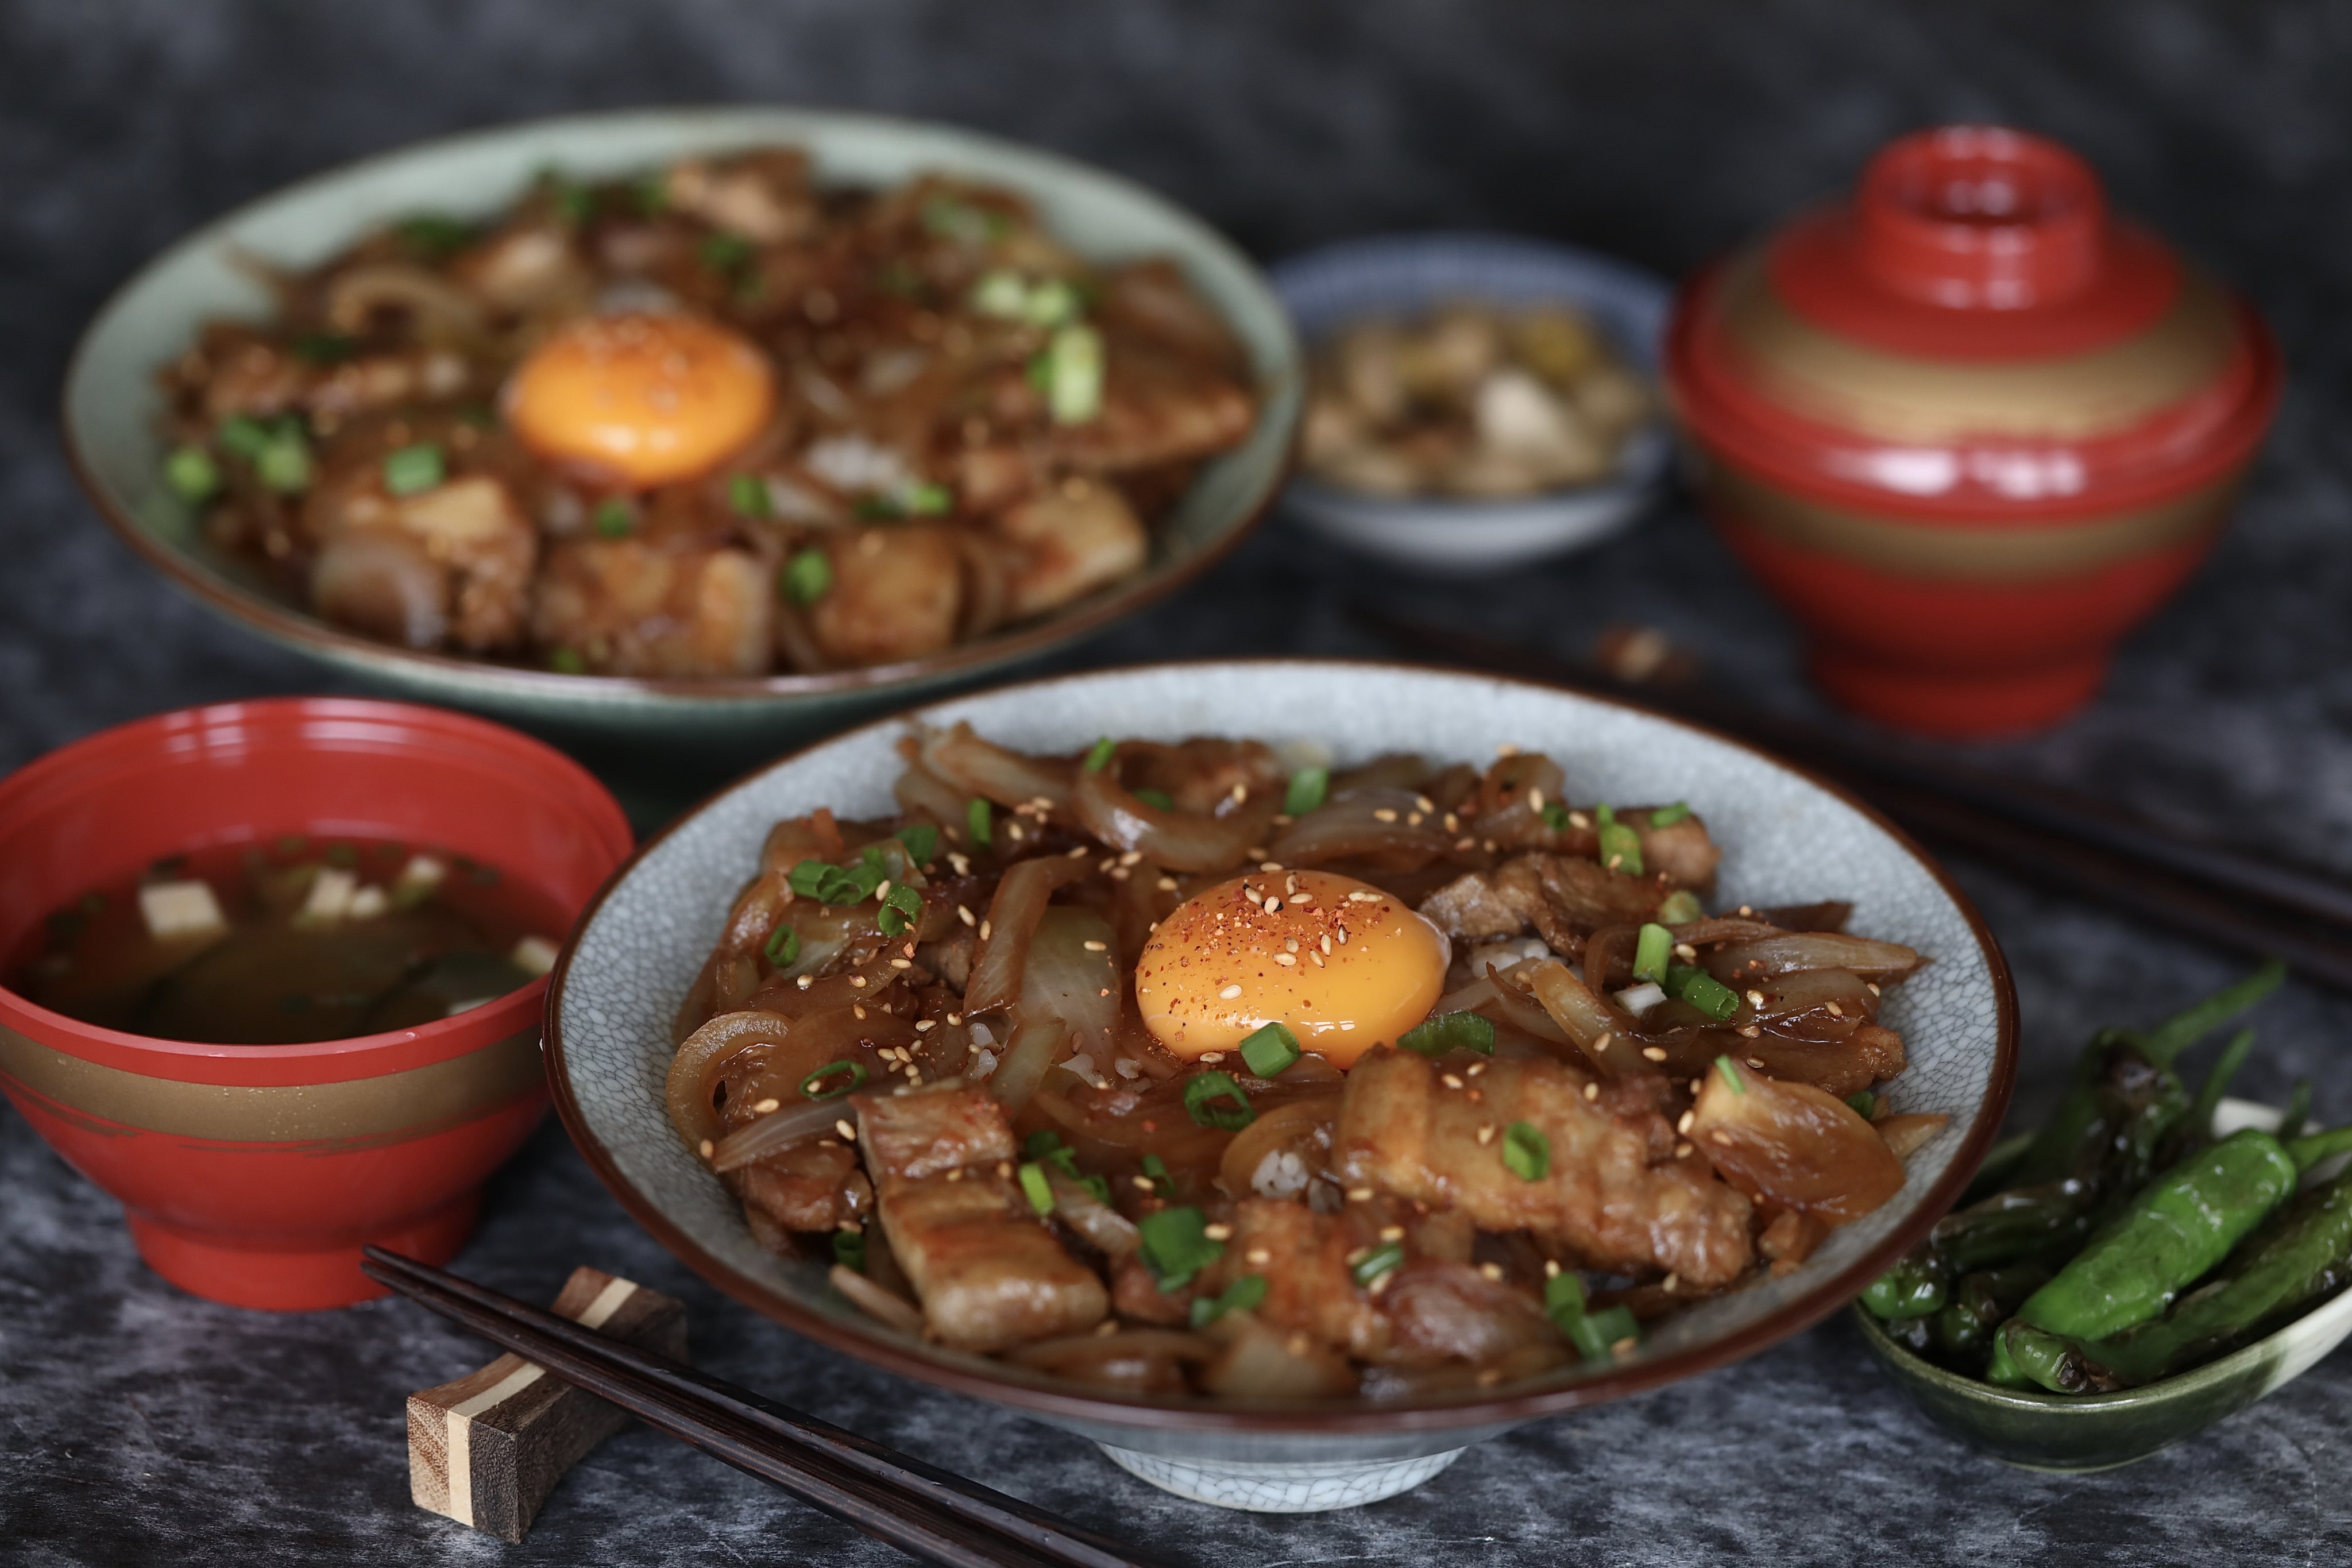 Butadon (pork belly rice) is a simple but hearty Japanese dish. Photo: Jonathan Wong